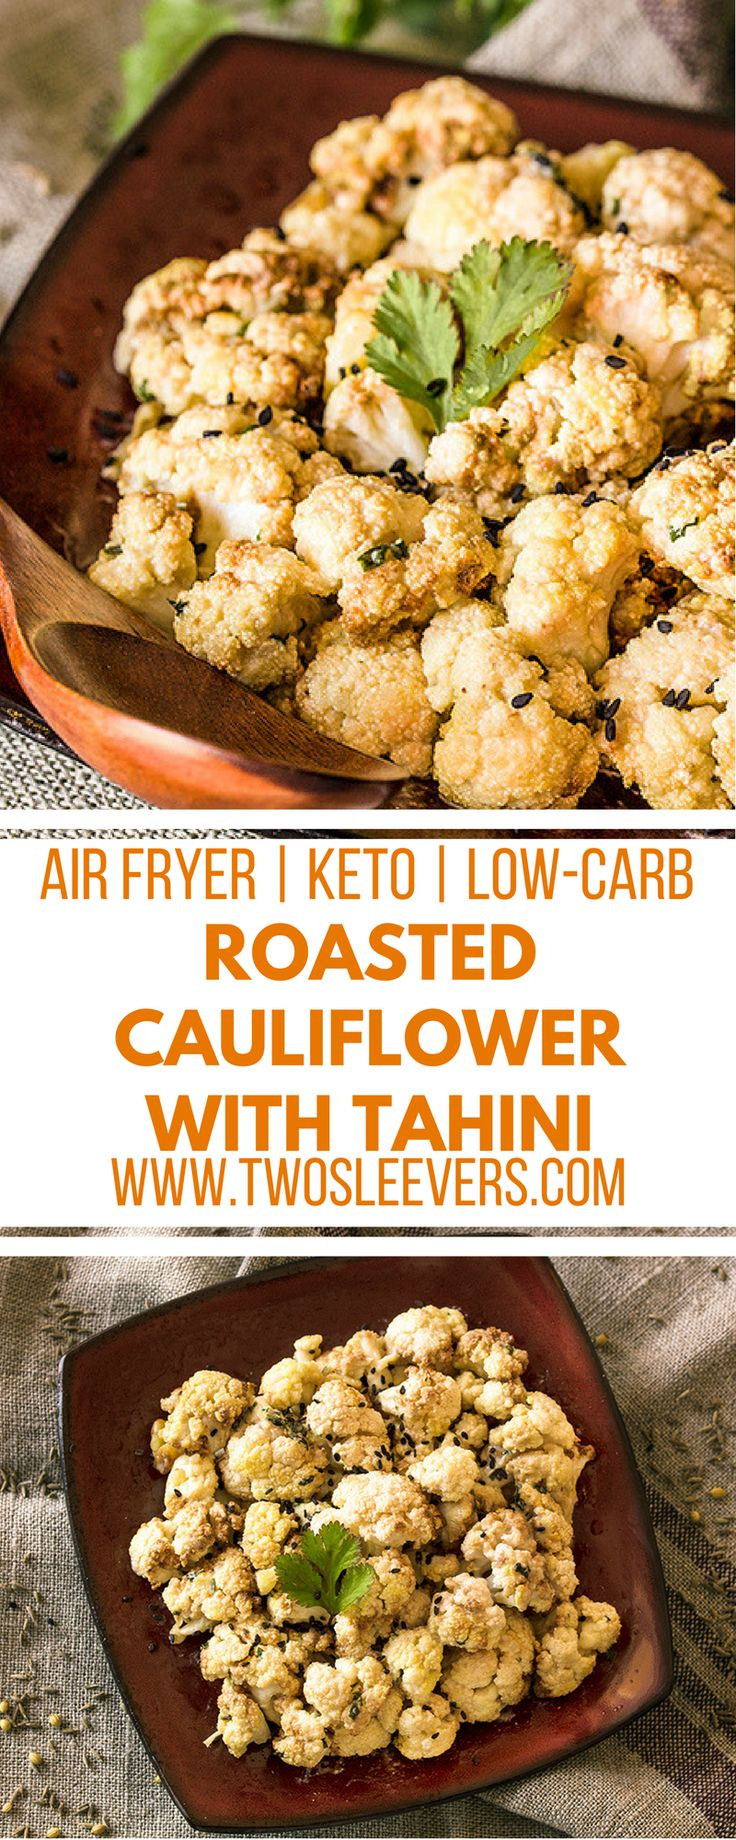 Low Carb Air Fryer Recipes
 111 best Low Carb Air Fryer Recipes images on Pinterest